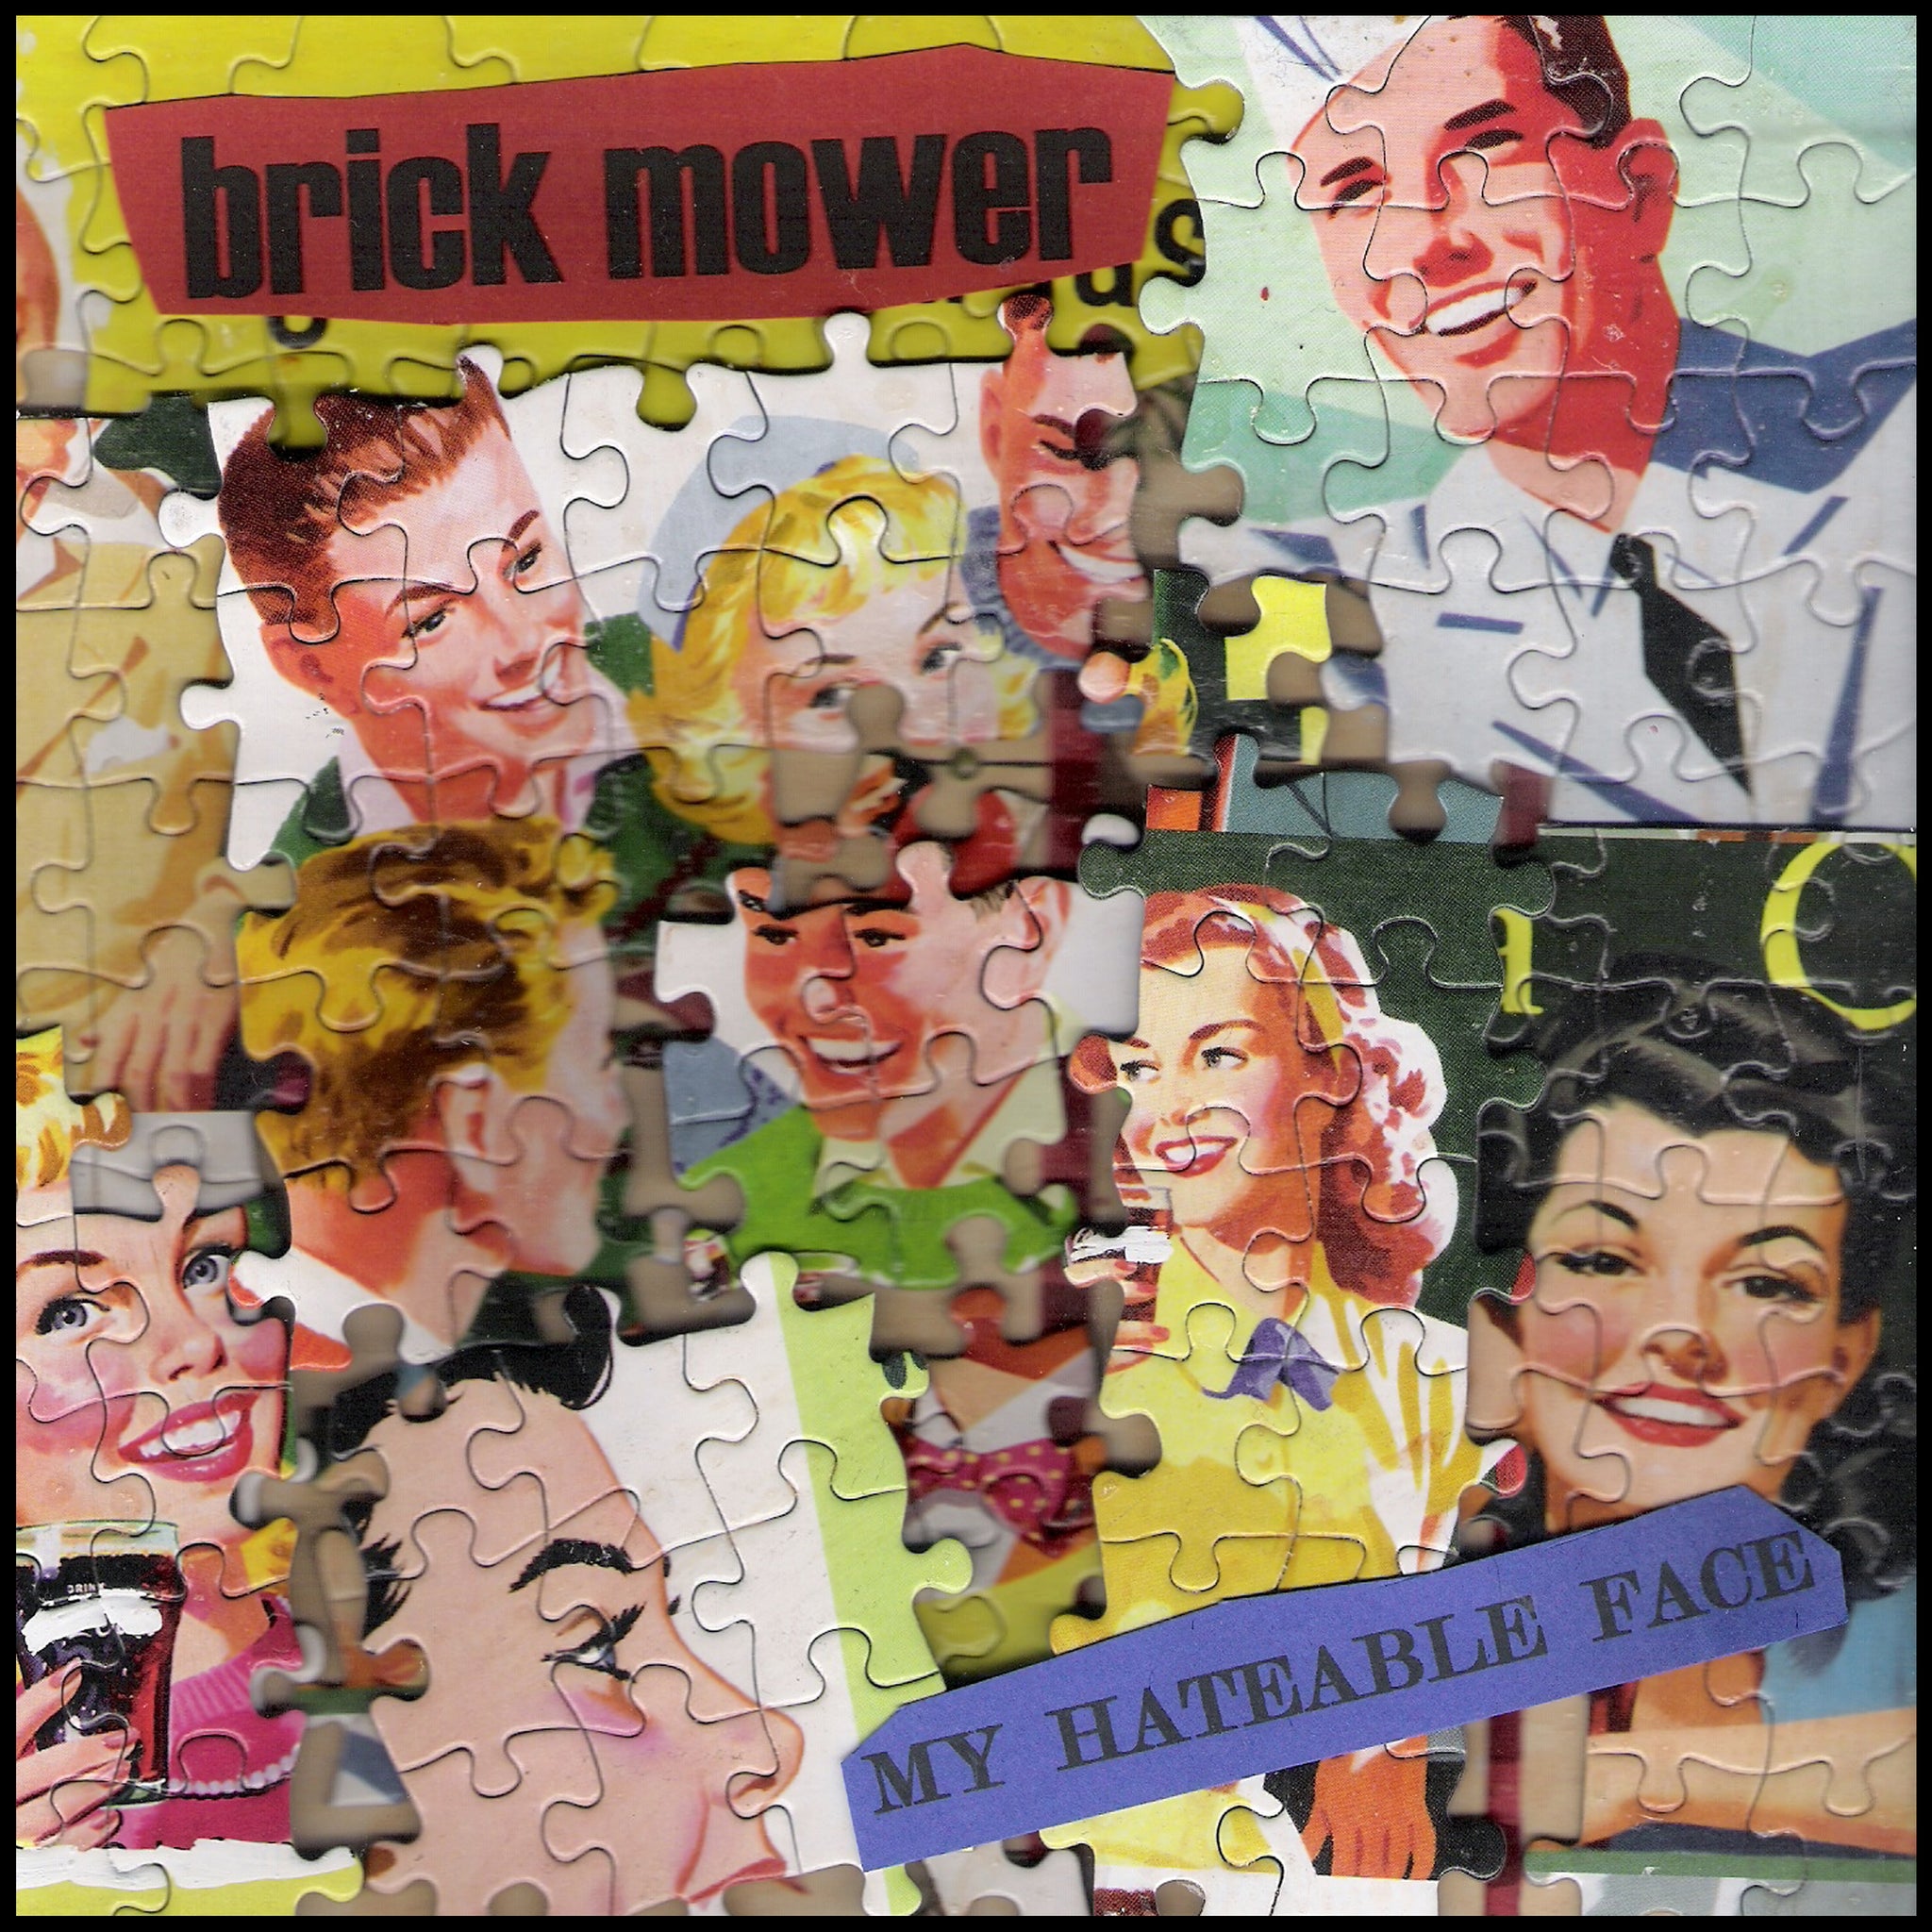 Brick Mower "My Hateable Face" CD